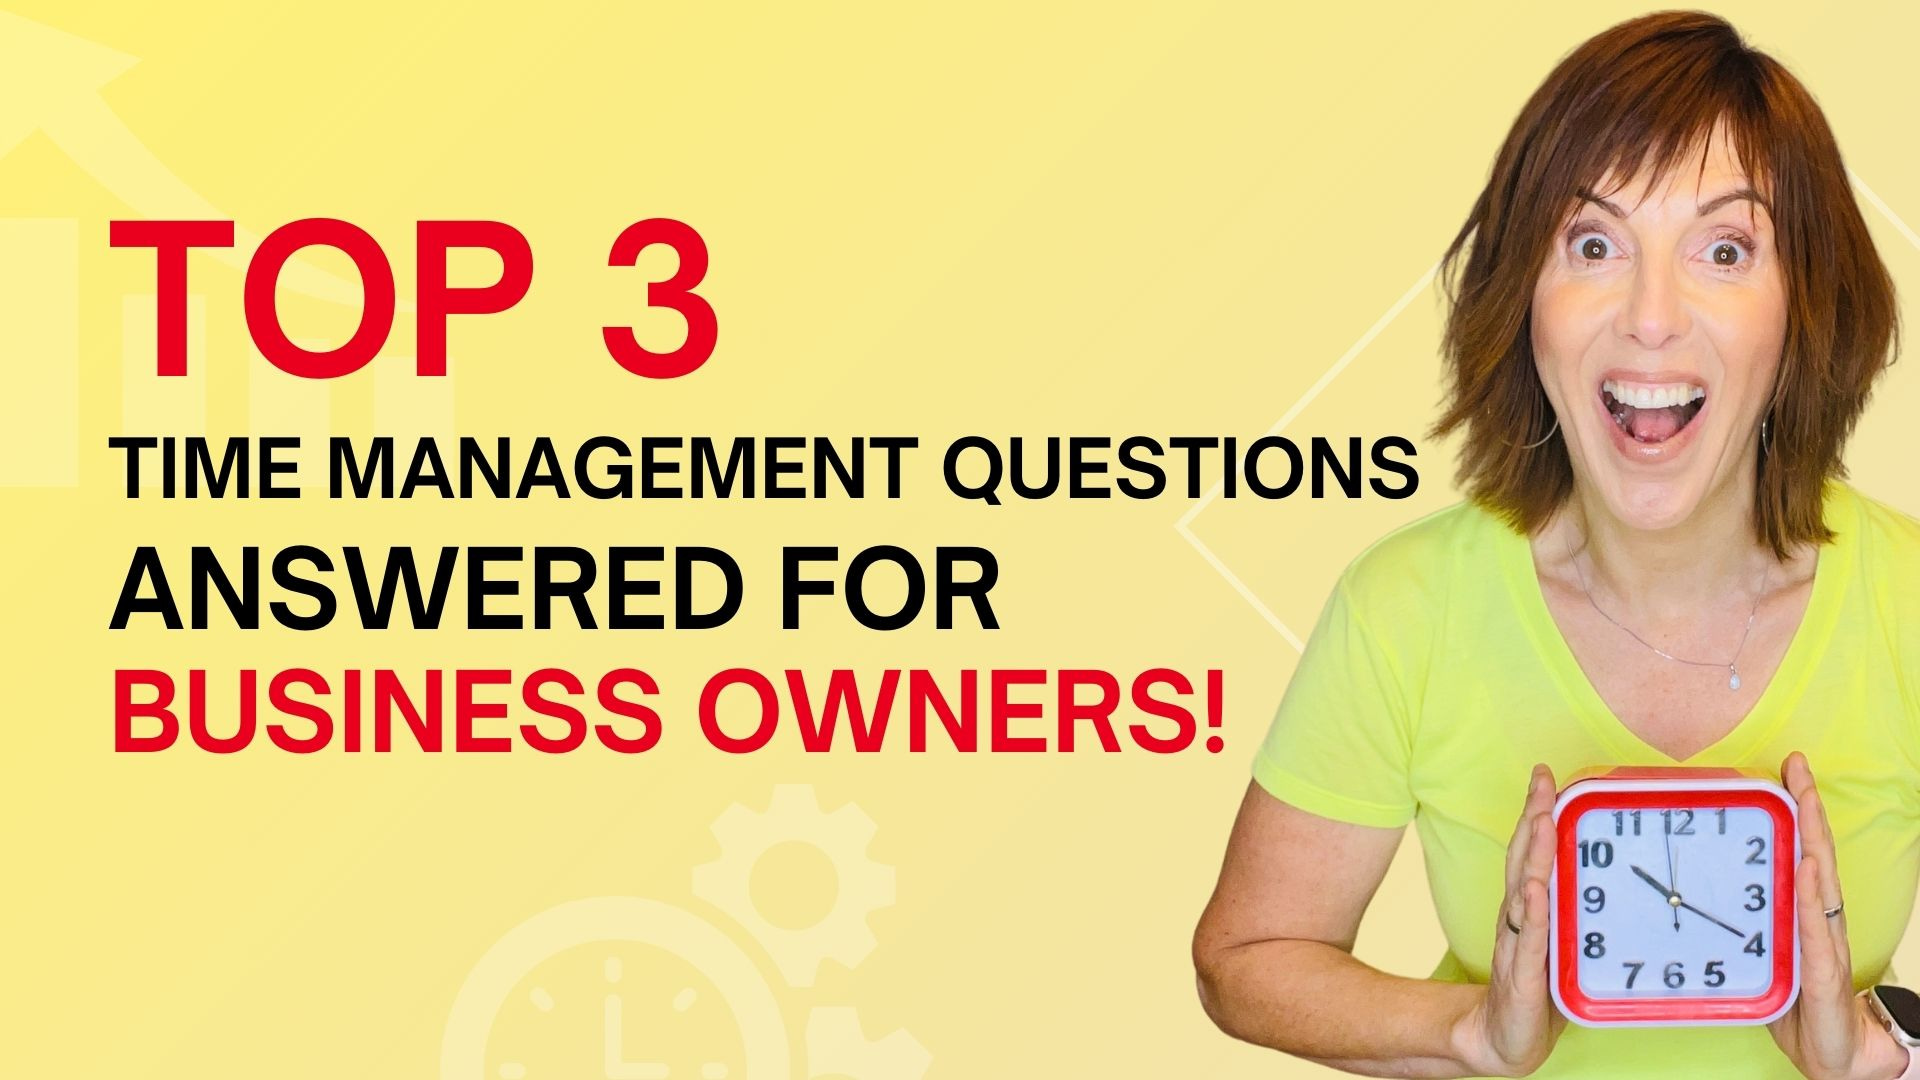 3 Key Time Management Tips for Business Owners!